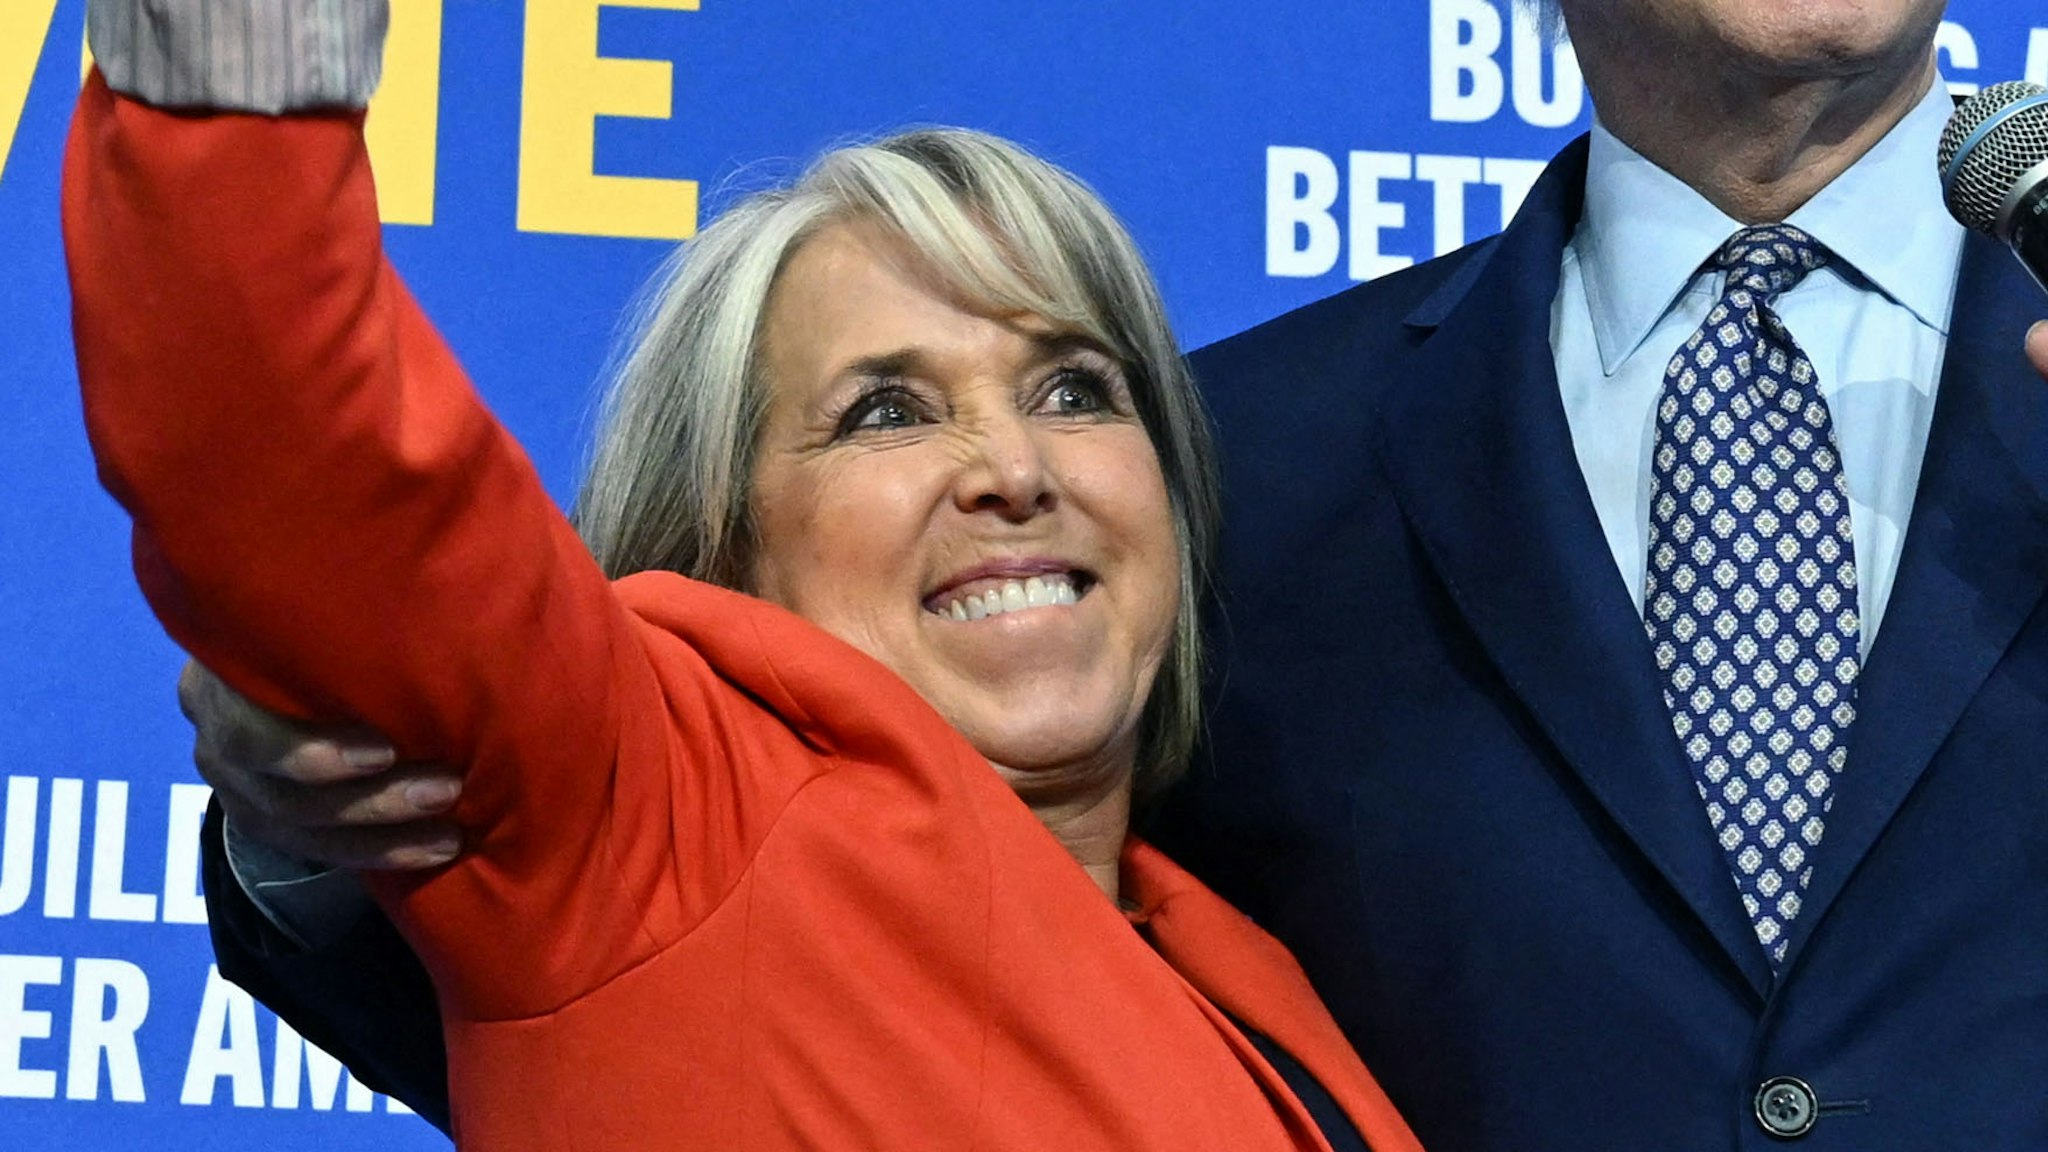 New Mexico Governor Michelle Lujan Grisham (L) gestures next to US President Joe Biden during a rally hosted by the Democratic Party of New Mexico at Ted M. Gallegos Community Center in Albuquerque, New Mexico, on November 3, 2022.